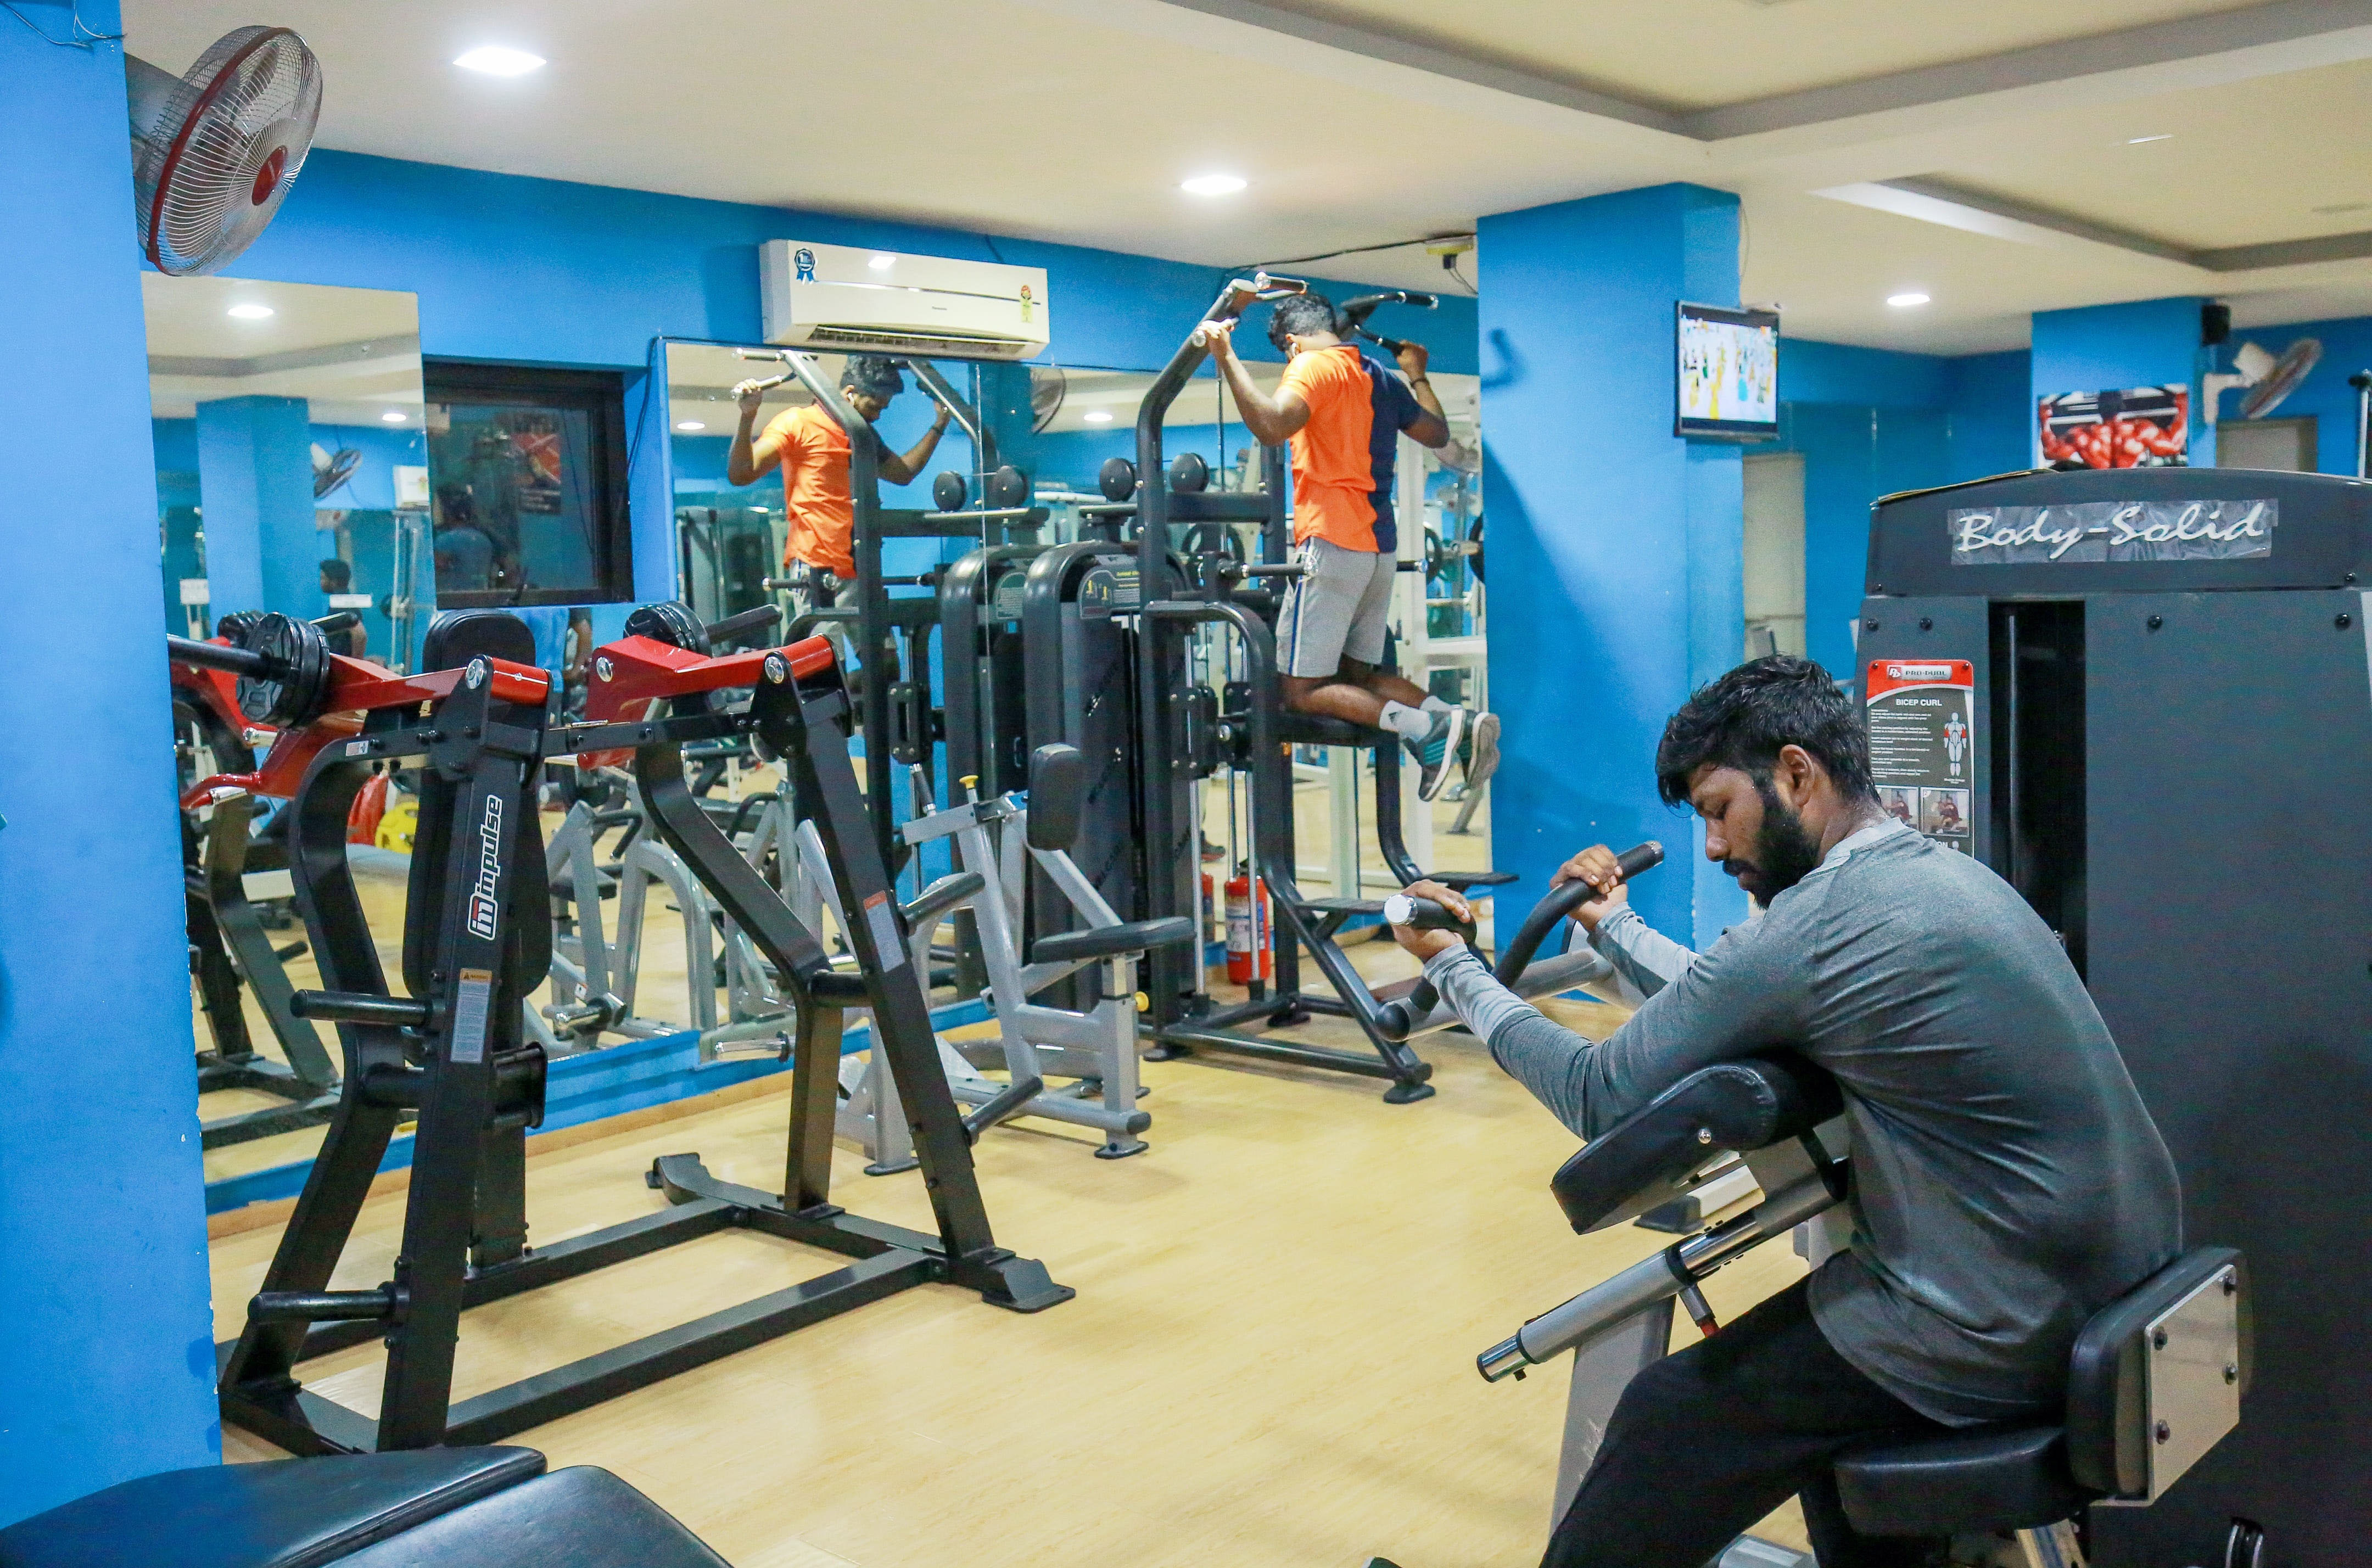 gyms in coimbatore